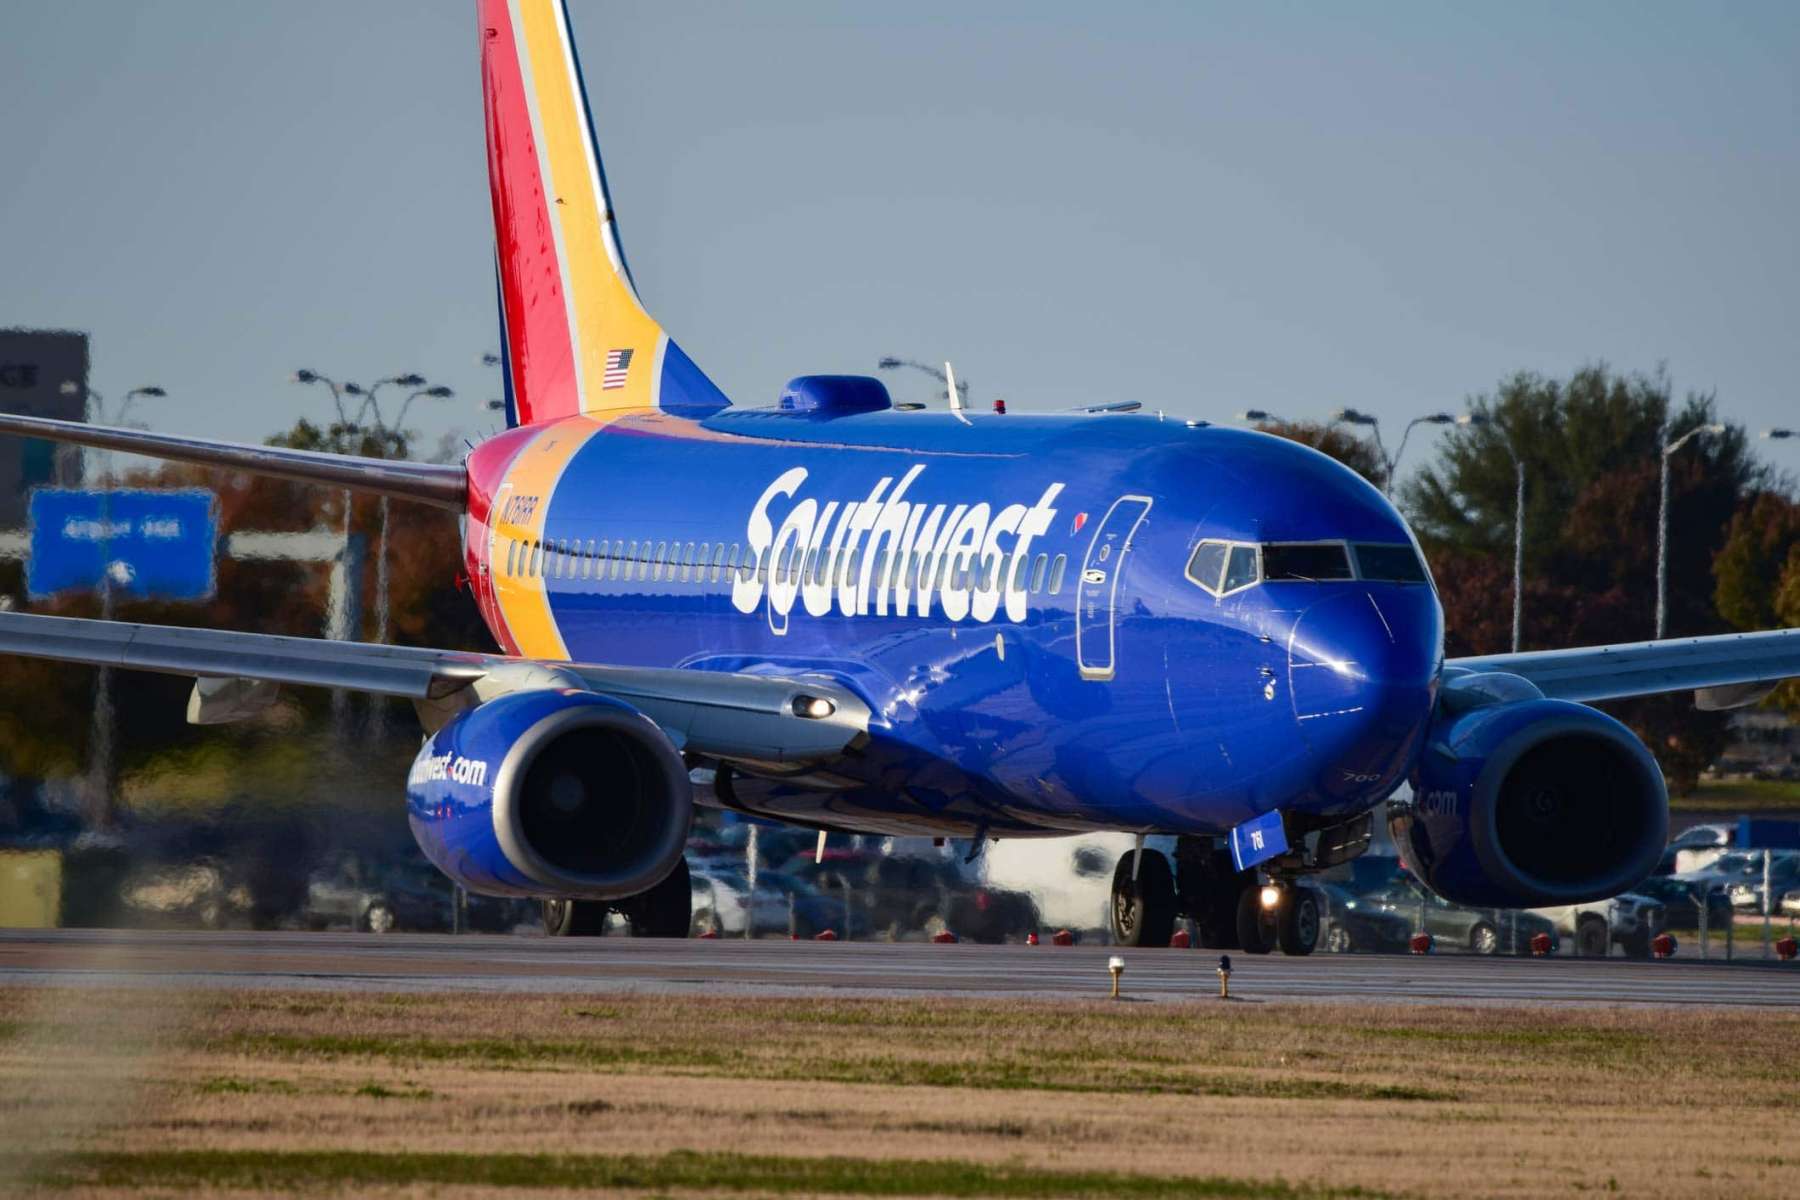 Rhode Island News: Travelers Beware: Flying Southwest Airlines Can Have Severe Consequences